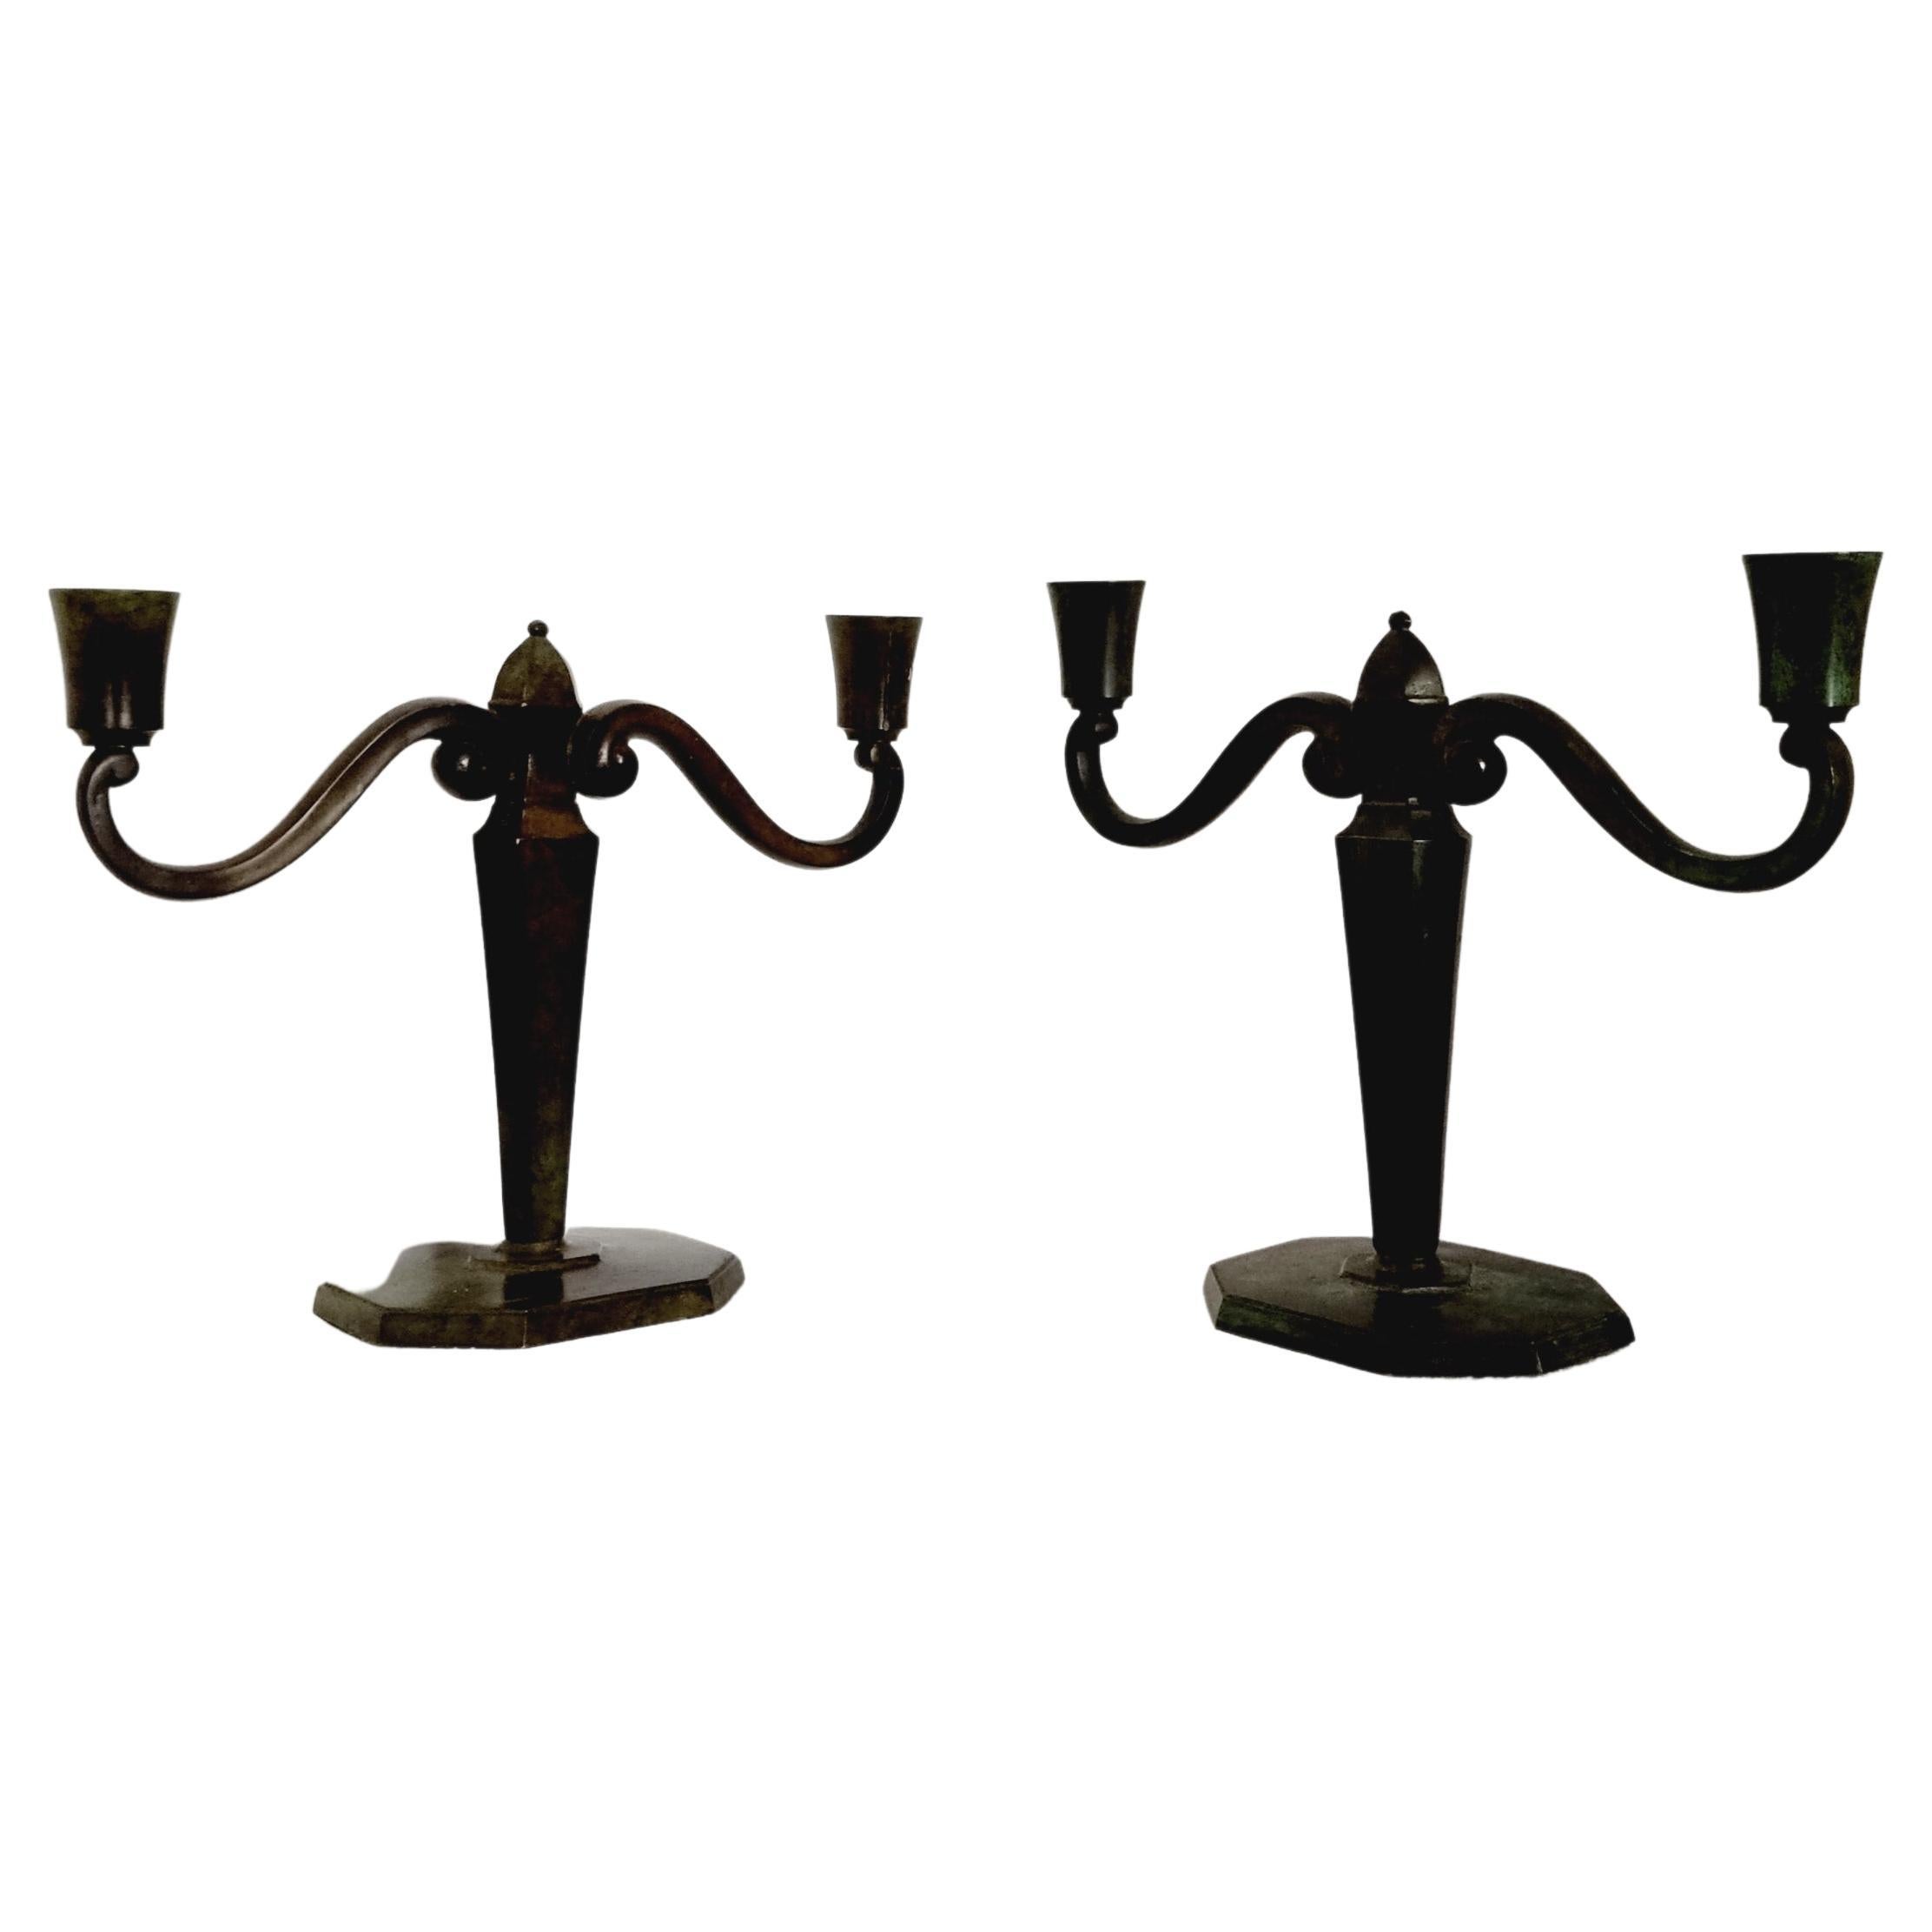 Jacob Ängman for GAB, Pair of Solid Bronze Candelabras, Swedish Grace For Sale